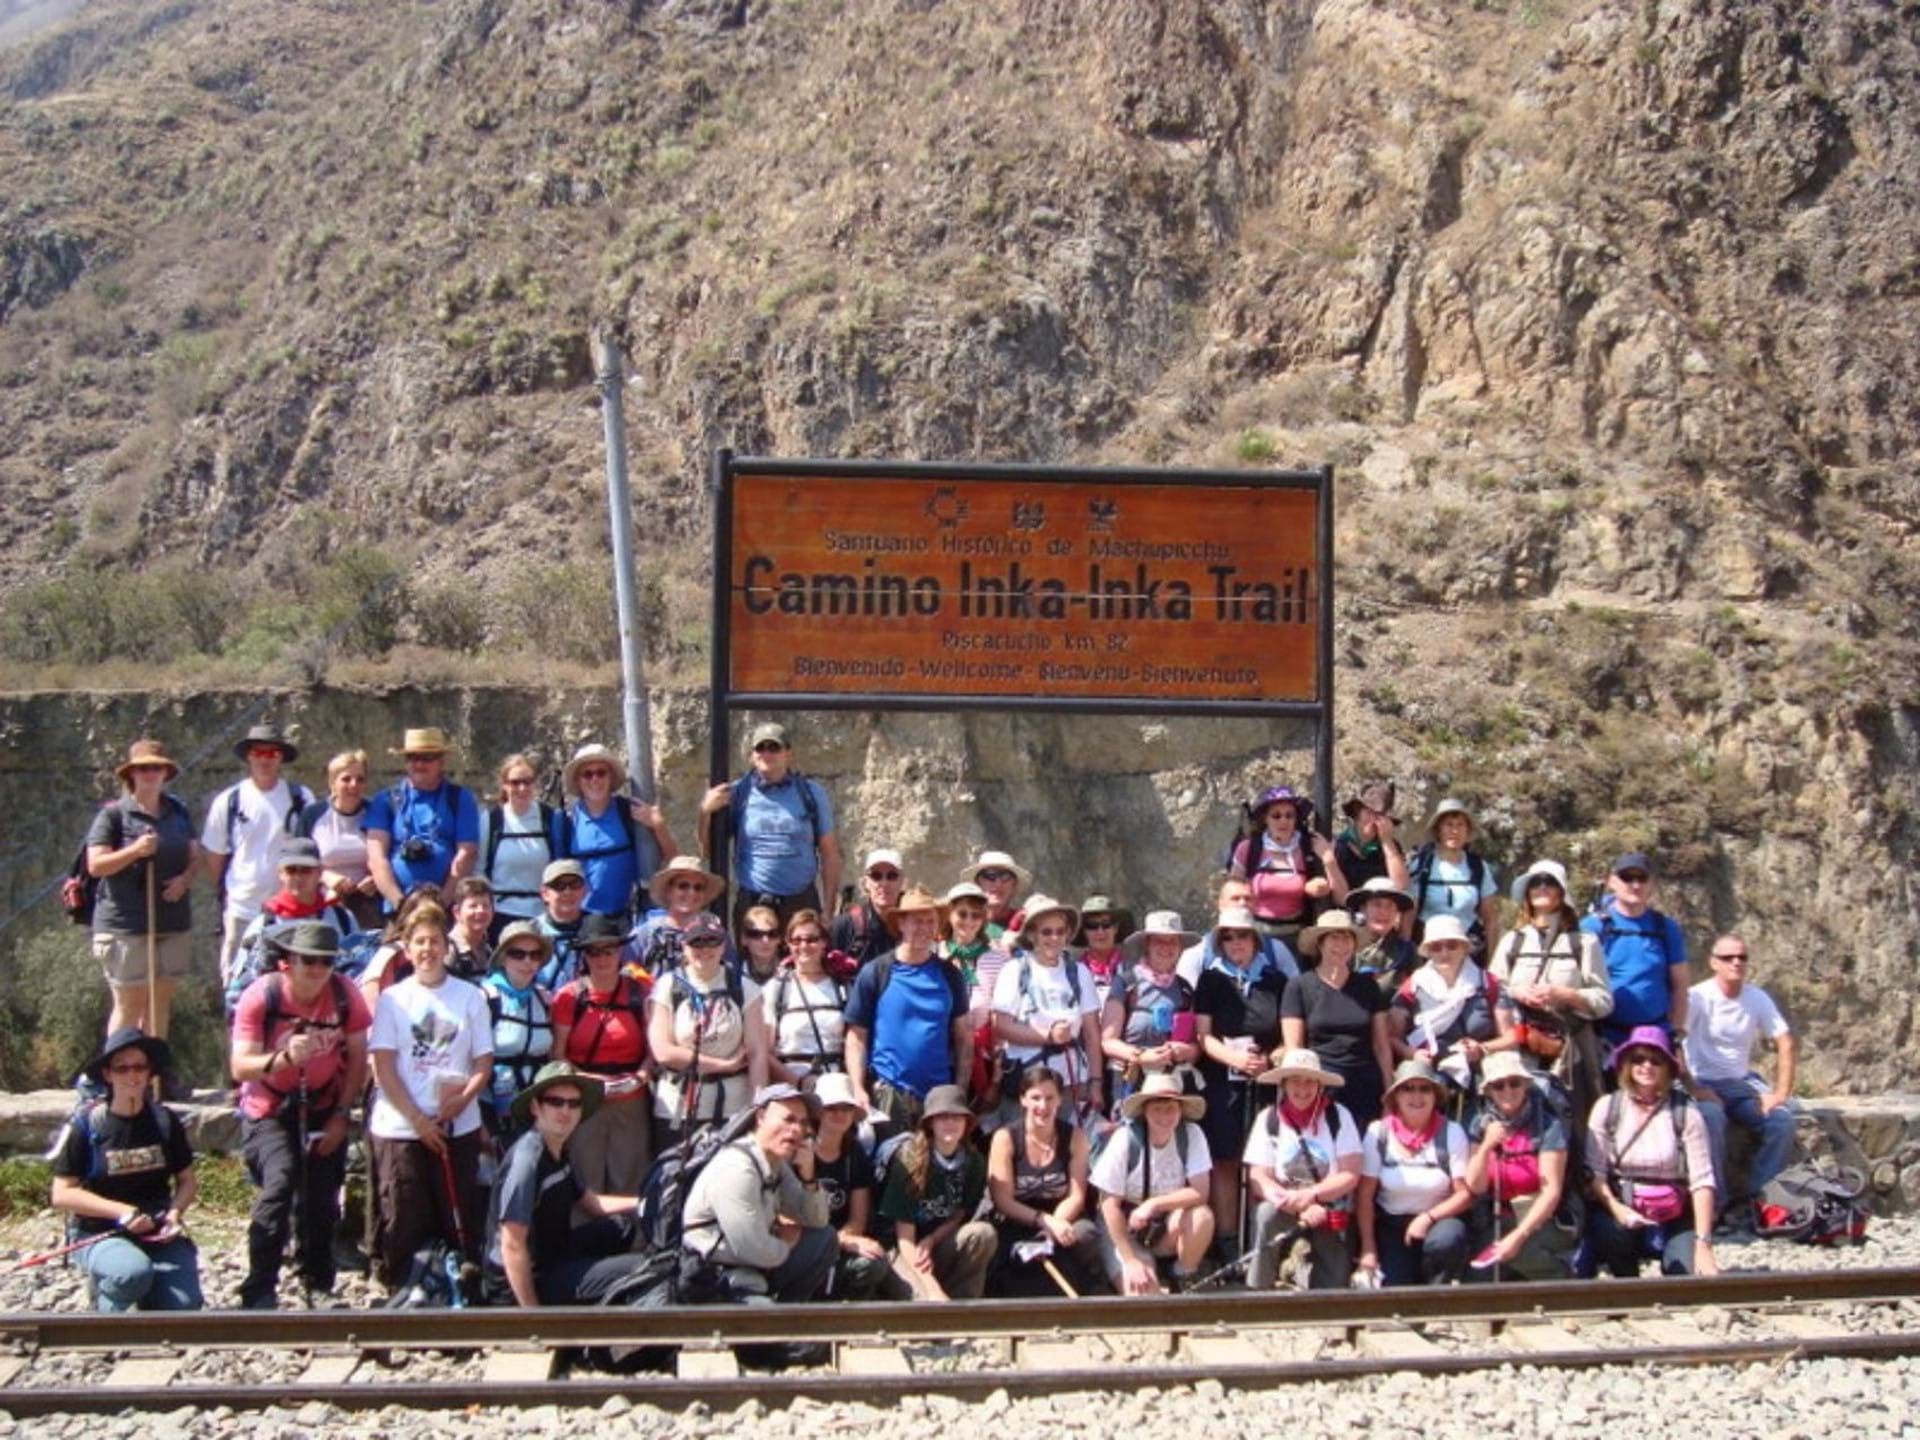 Had you done any Dream Challenges prior to the Inca Trail?